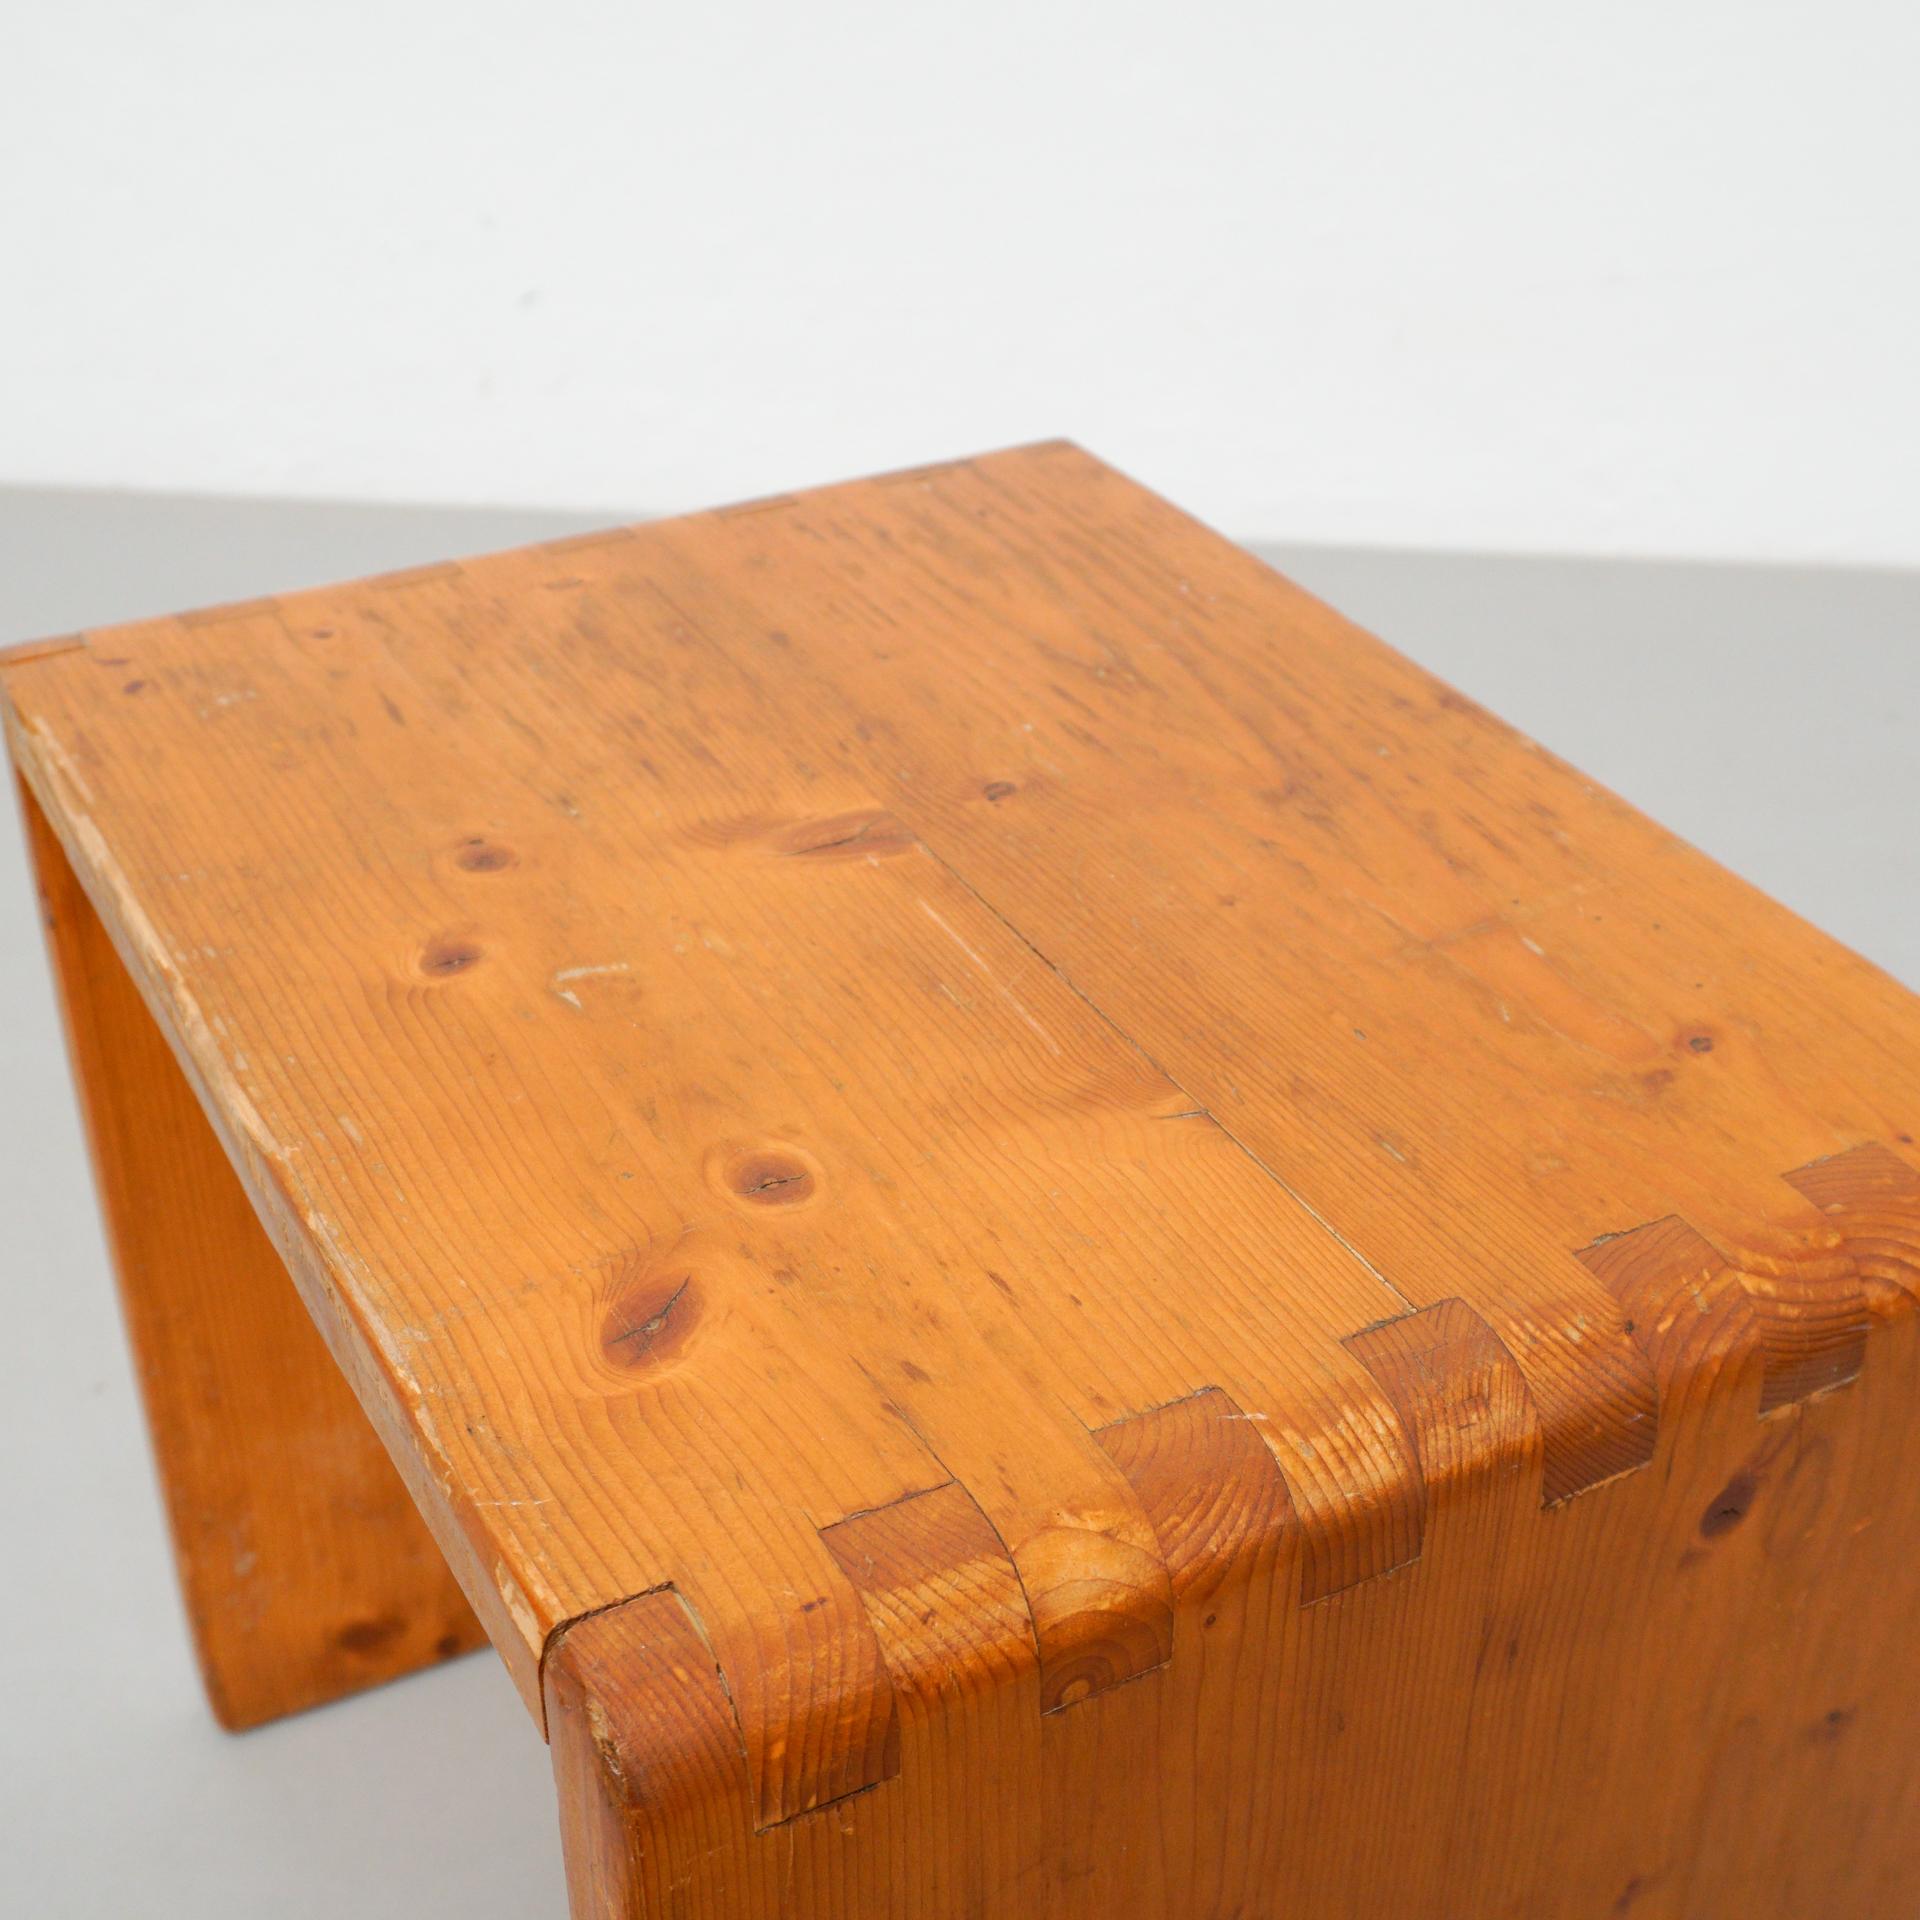 Stool designed by Charlotte Perriand for Les Arcs ski Resort, circa 1960, manufactured in France.
Pinewood.

In nice condition, with wear consistent with age and use, preserving a beautiful patina.

Charlotte Perriand (1903-1999). She was born